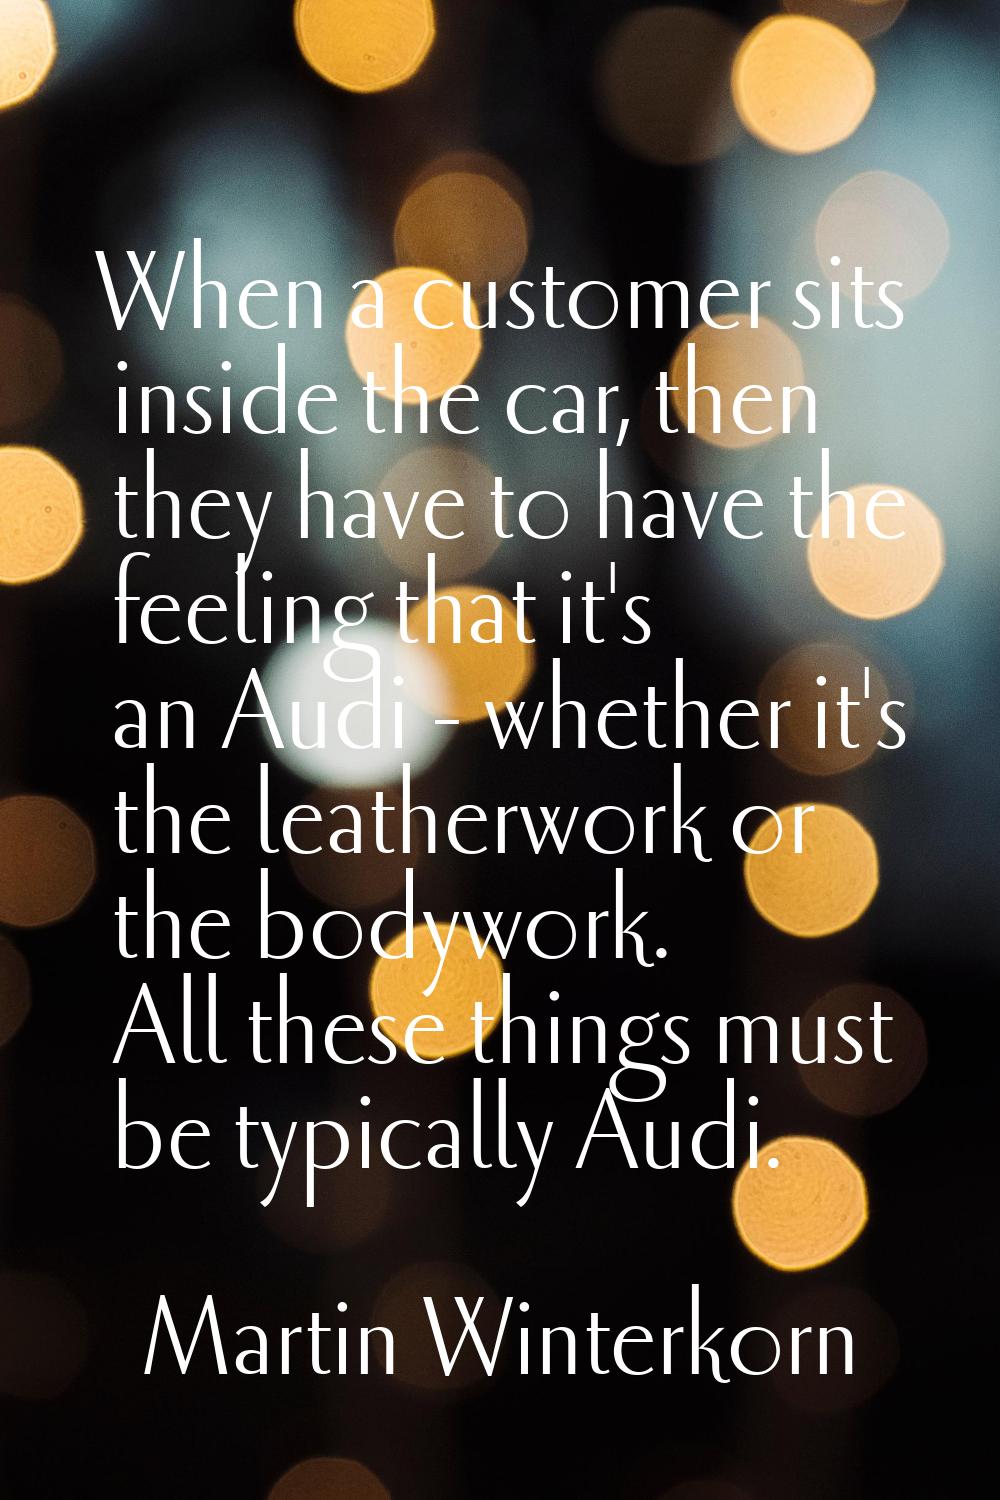 When a customer sits inside the car, then they have to have the feeling that it's an Audi - whether